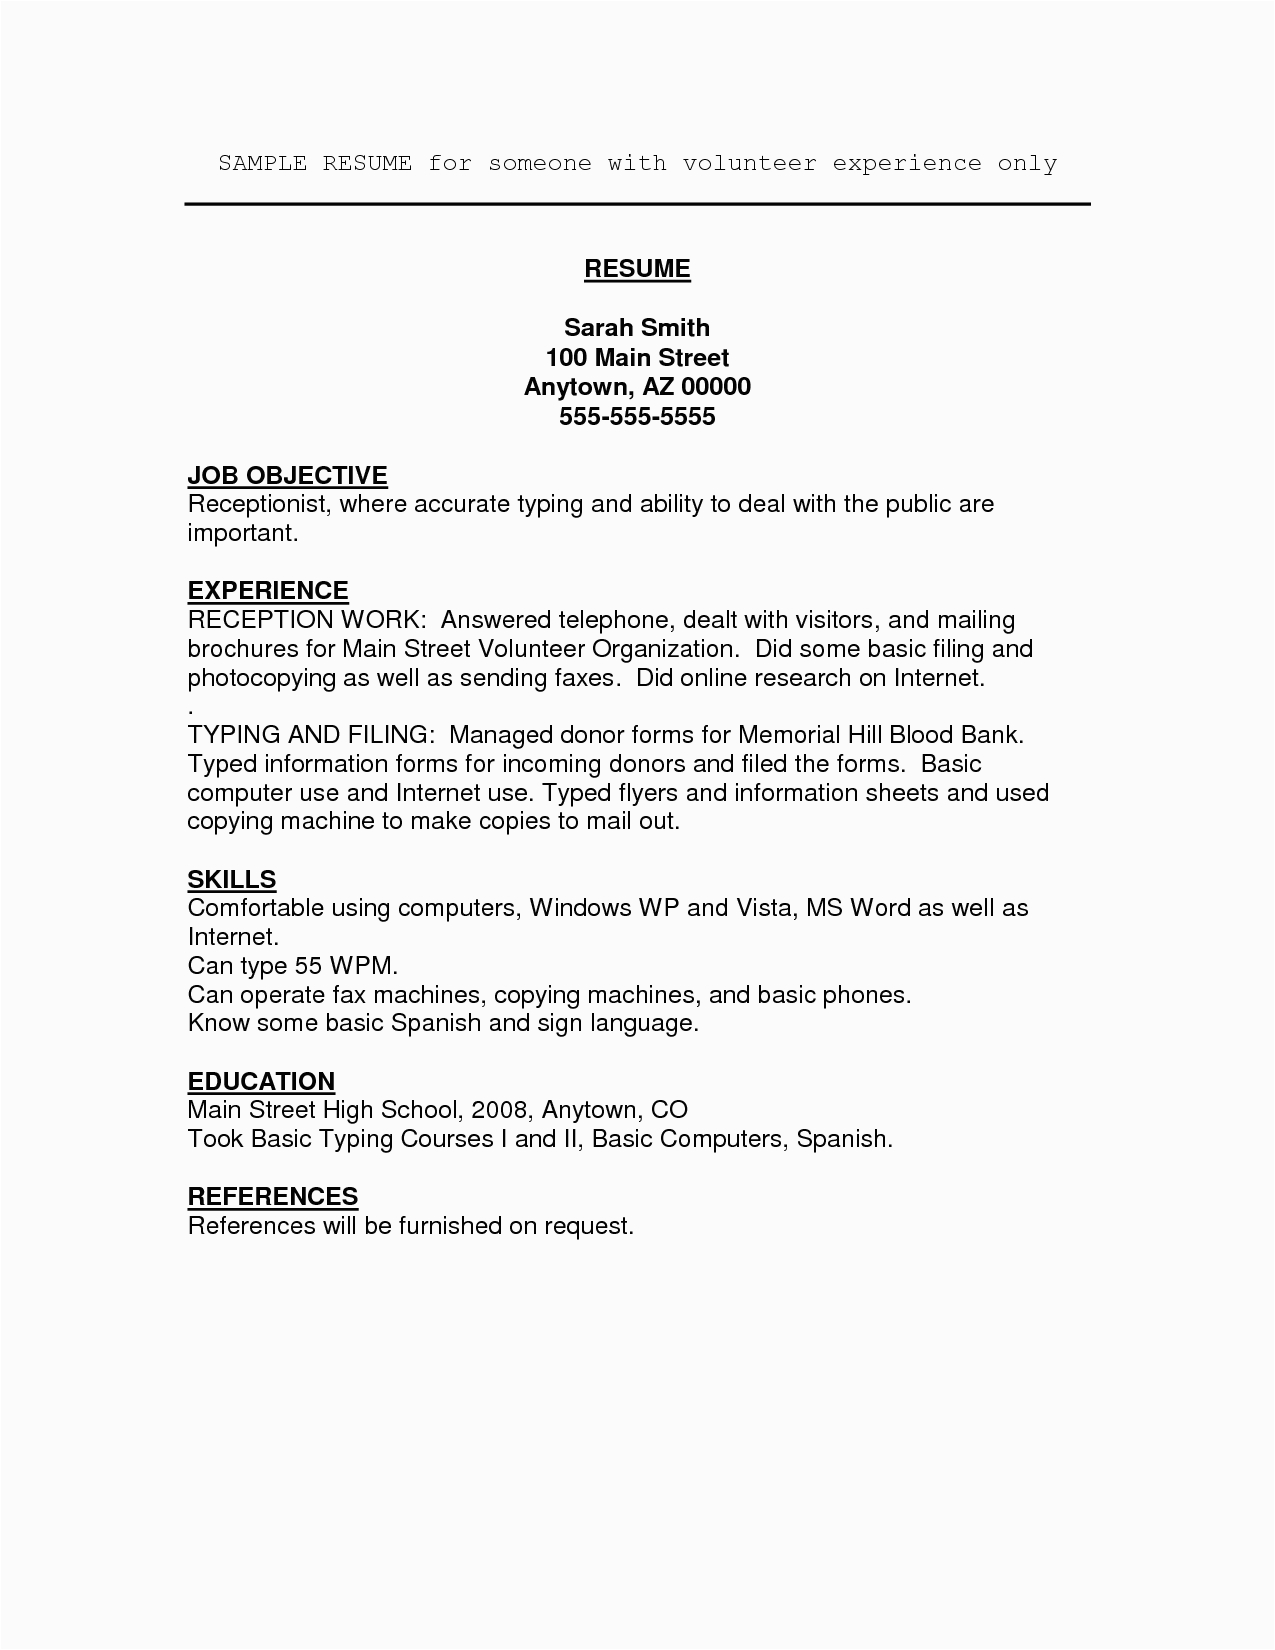 Sample Resume for Highschool Students with Volunteer Experience Job Resume Volunteer Experience Umecareer